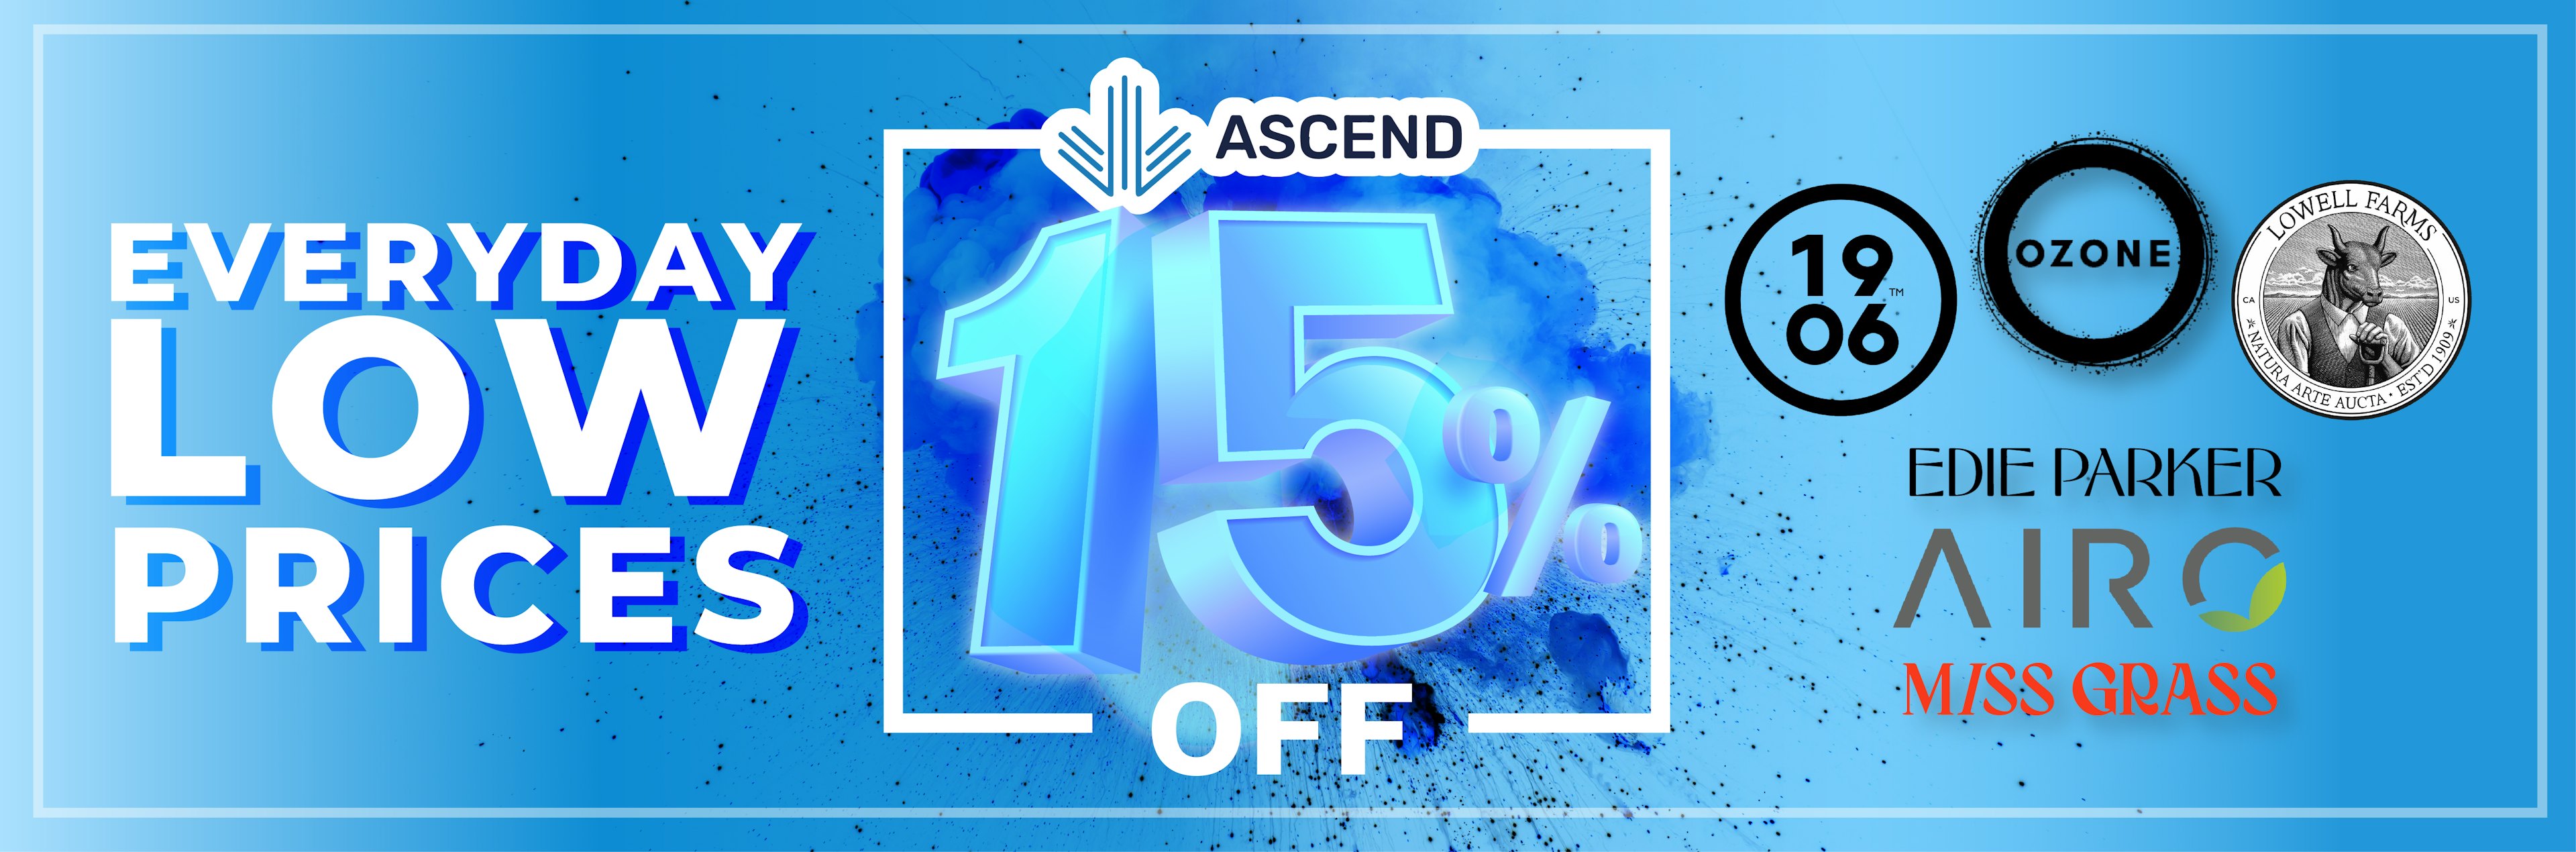 ASCEND EVERYDAY LOW PRICE